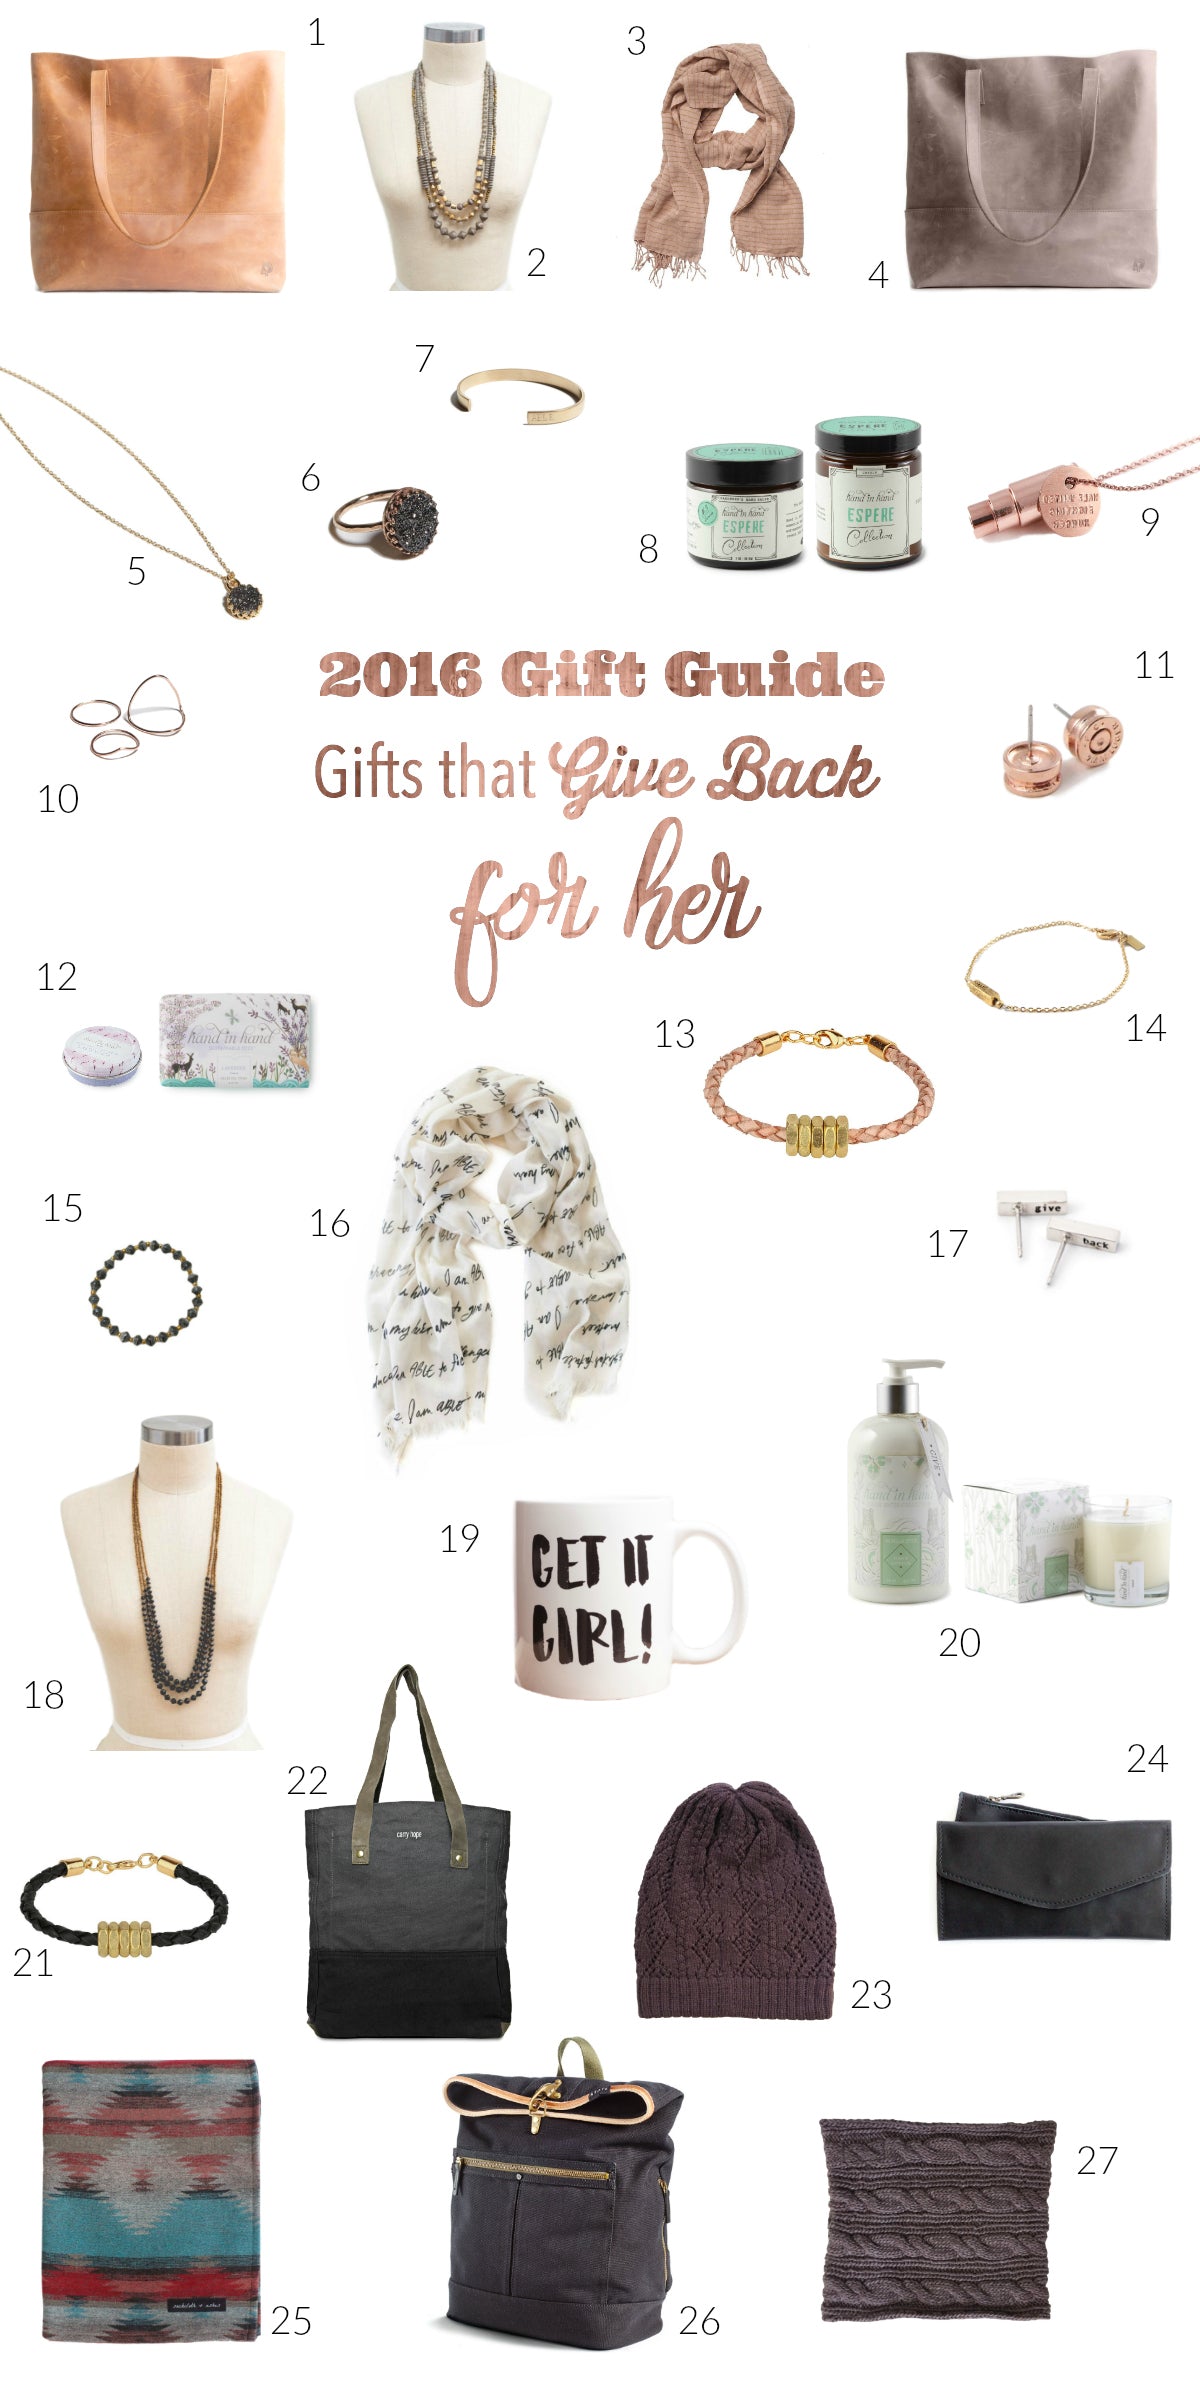 Gift Guide 2016 // Gifts that Give Back (For Her) // Gifts That Give Back to Charity 